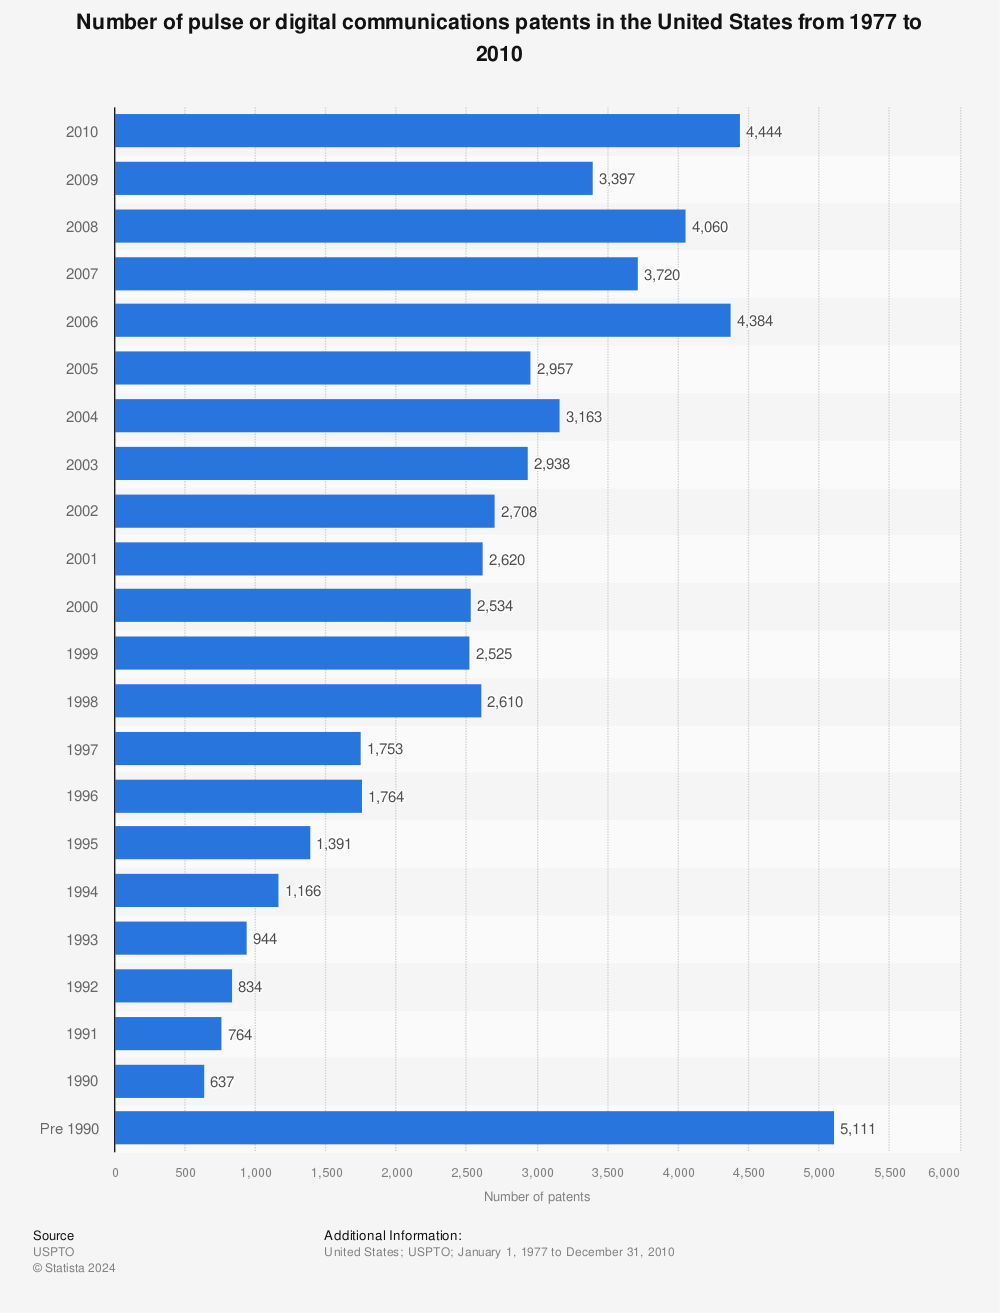 Statistic: Number of pulse or digital communications patents in the United States from 1977 to 2010 | Statista